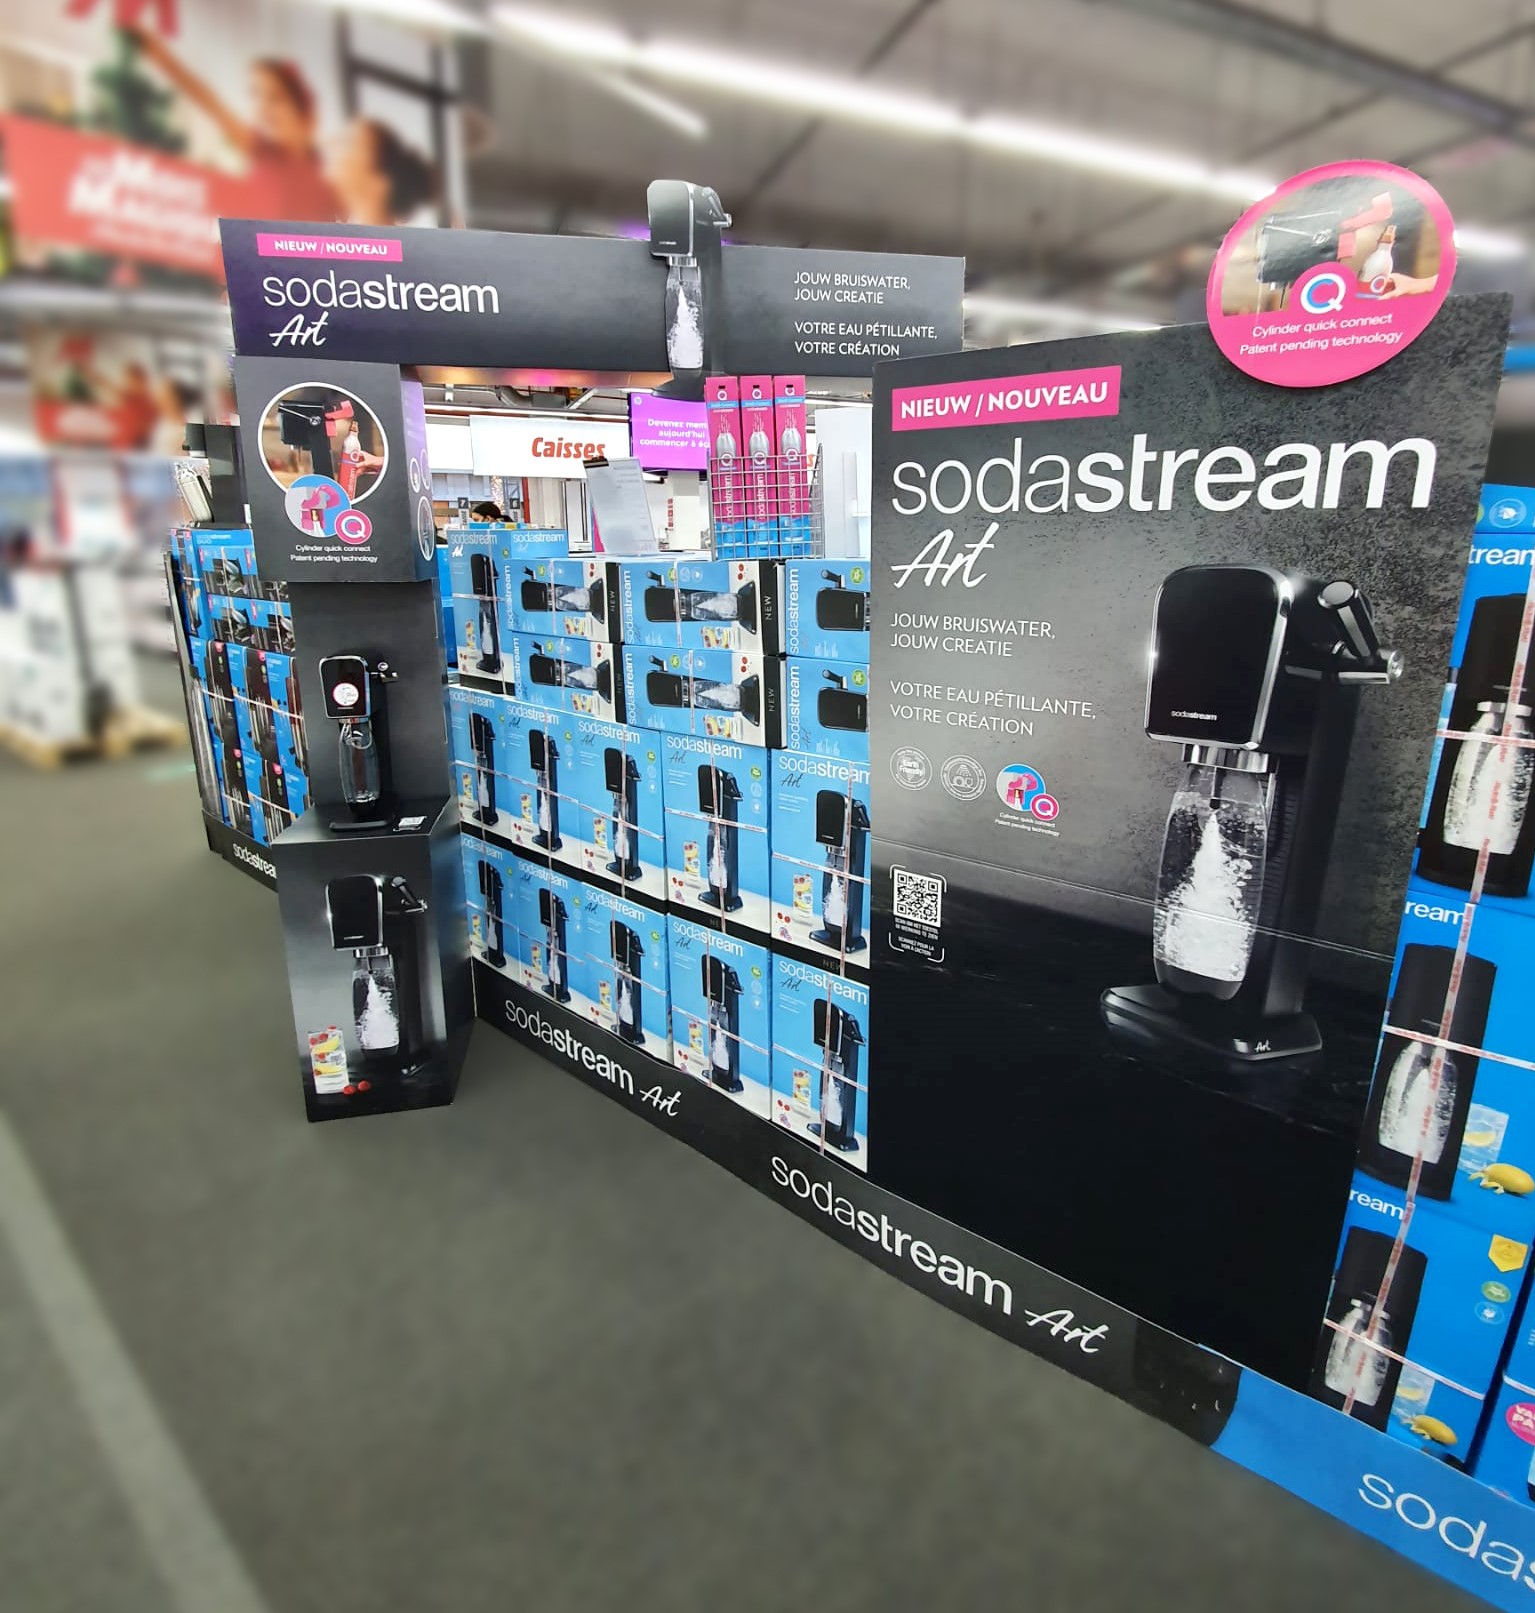 Thinkerbell supported SodaStream’s launch campaign 